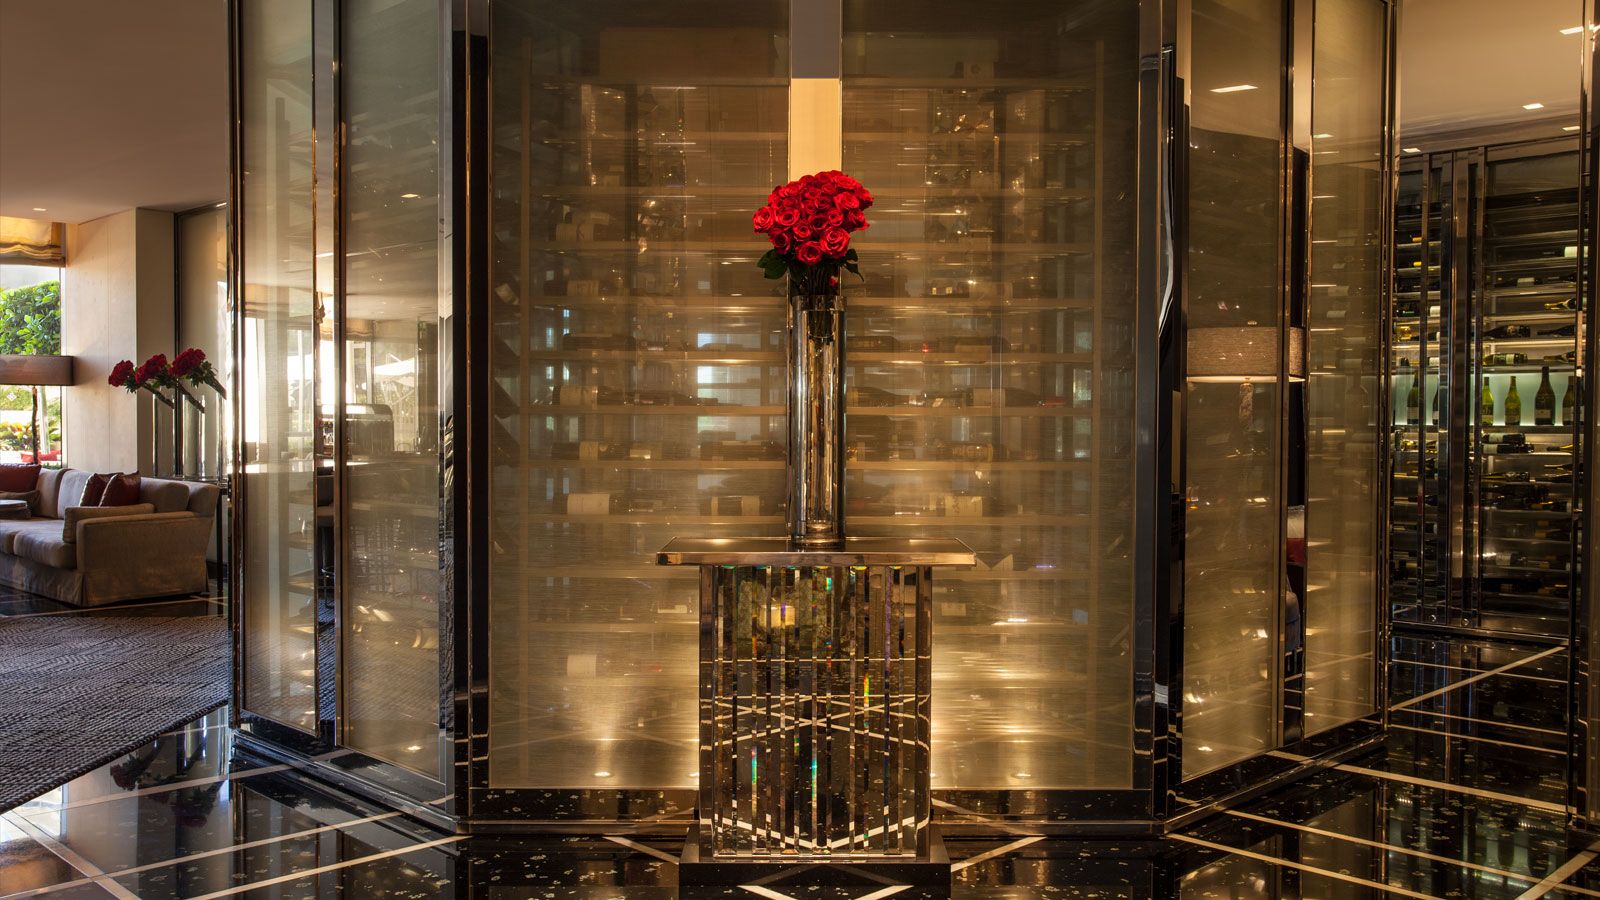 St. Regis Bal Harbour – South Tower gallery